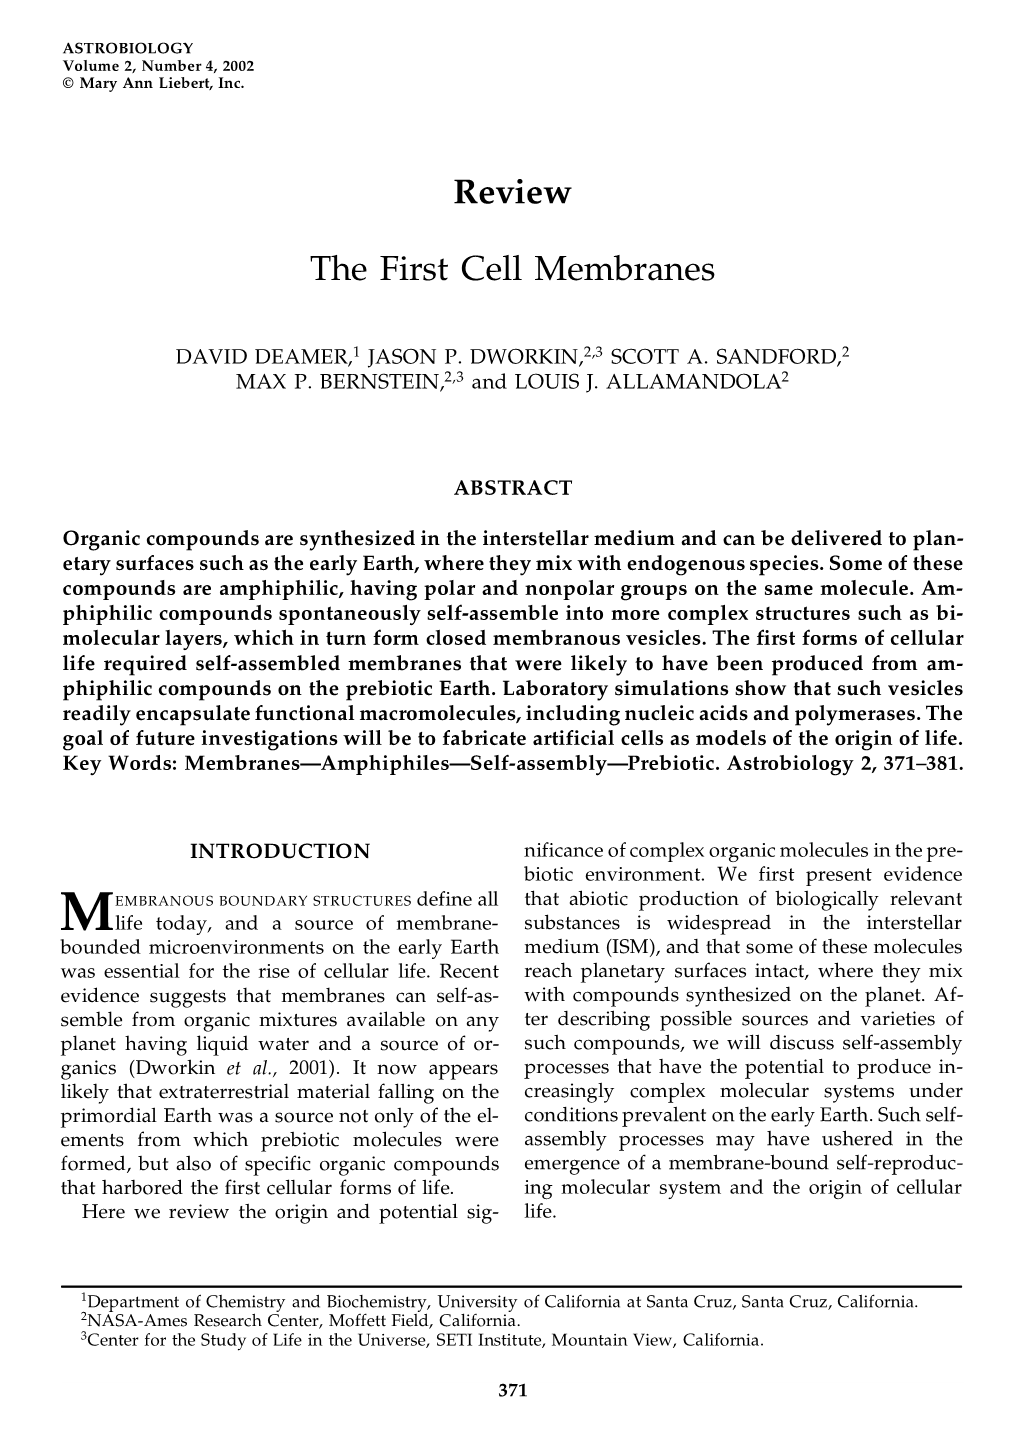 The First Cell Membranes